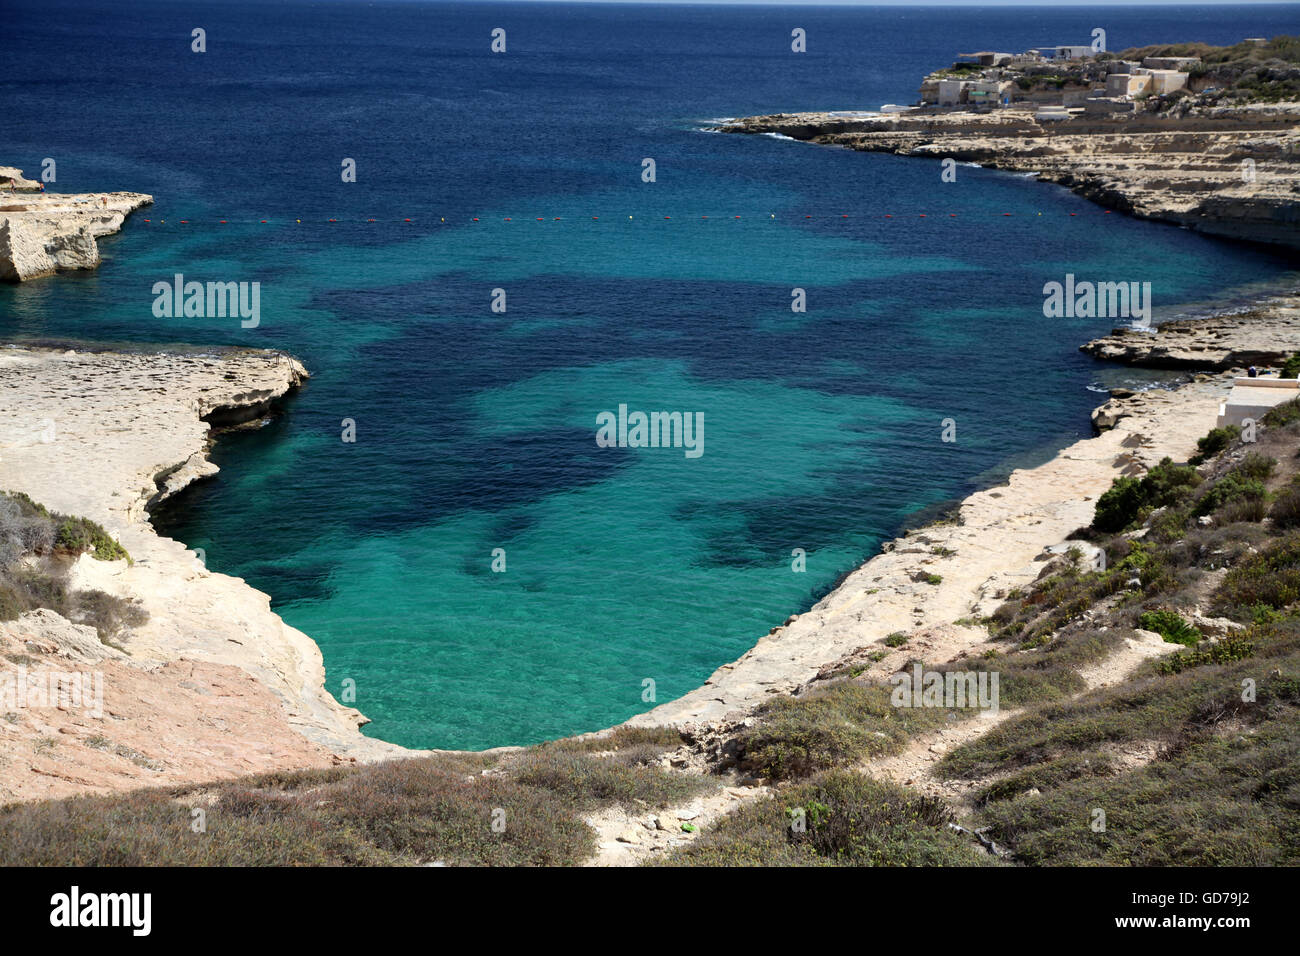 A favourite bathing spot in Malta at Delimara looking down on the bright blue sea Stock Photo